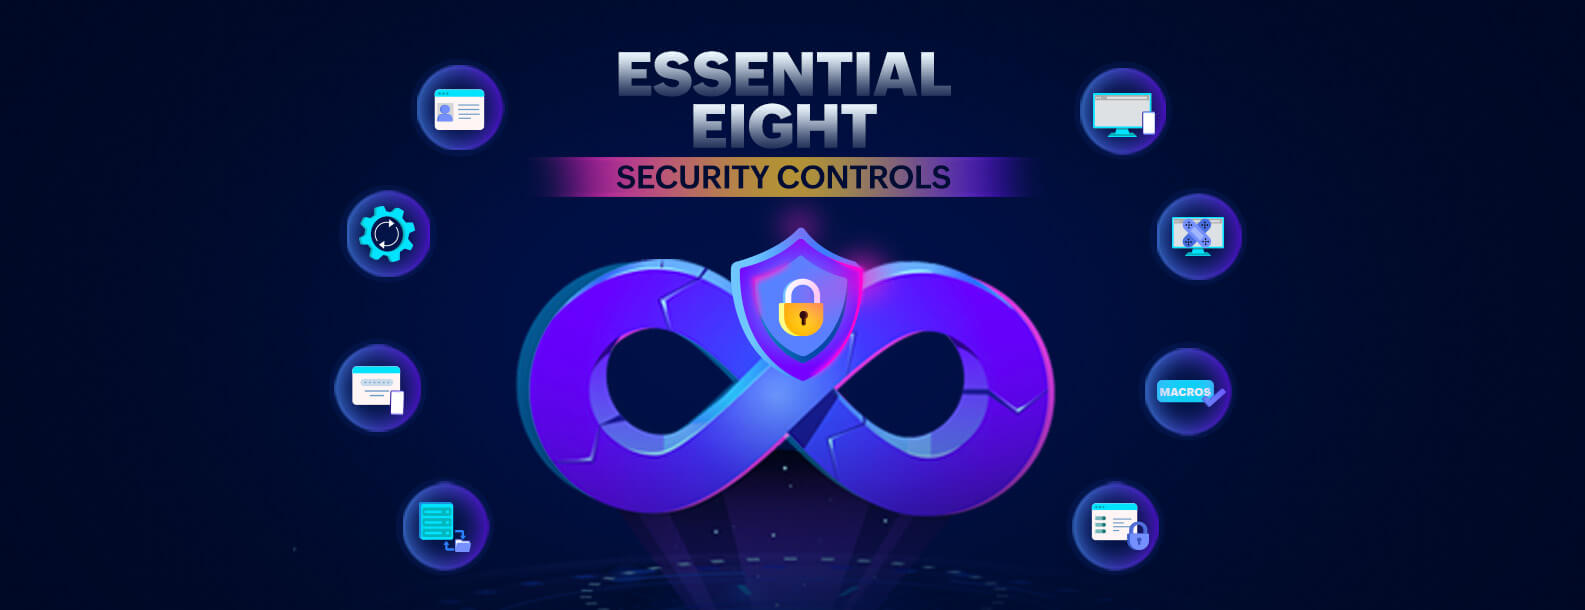 Essential Eight explained: ACSC's key security controls for organizational cybersecurity